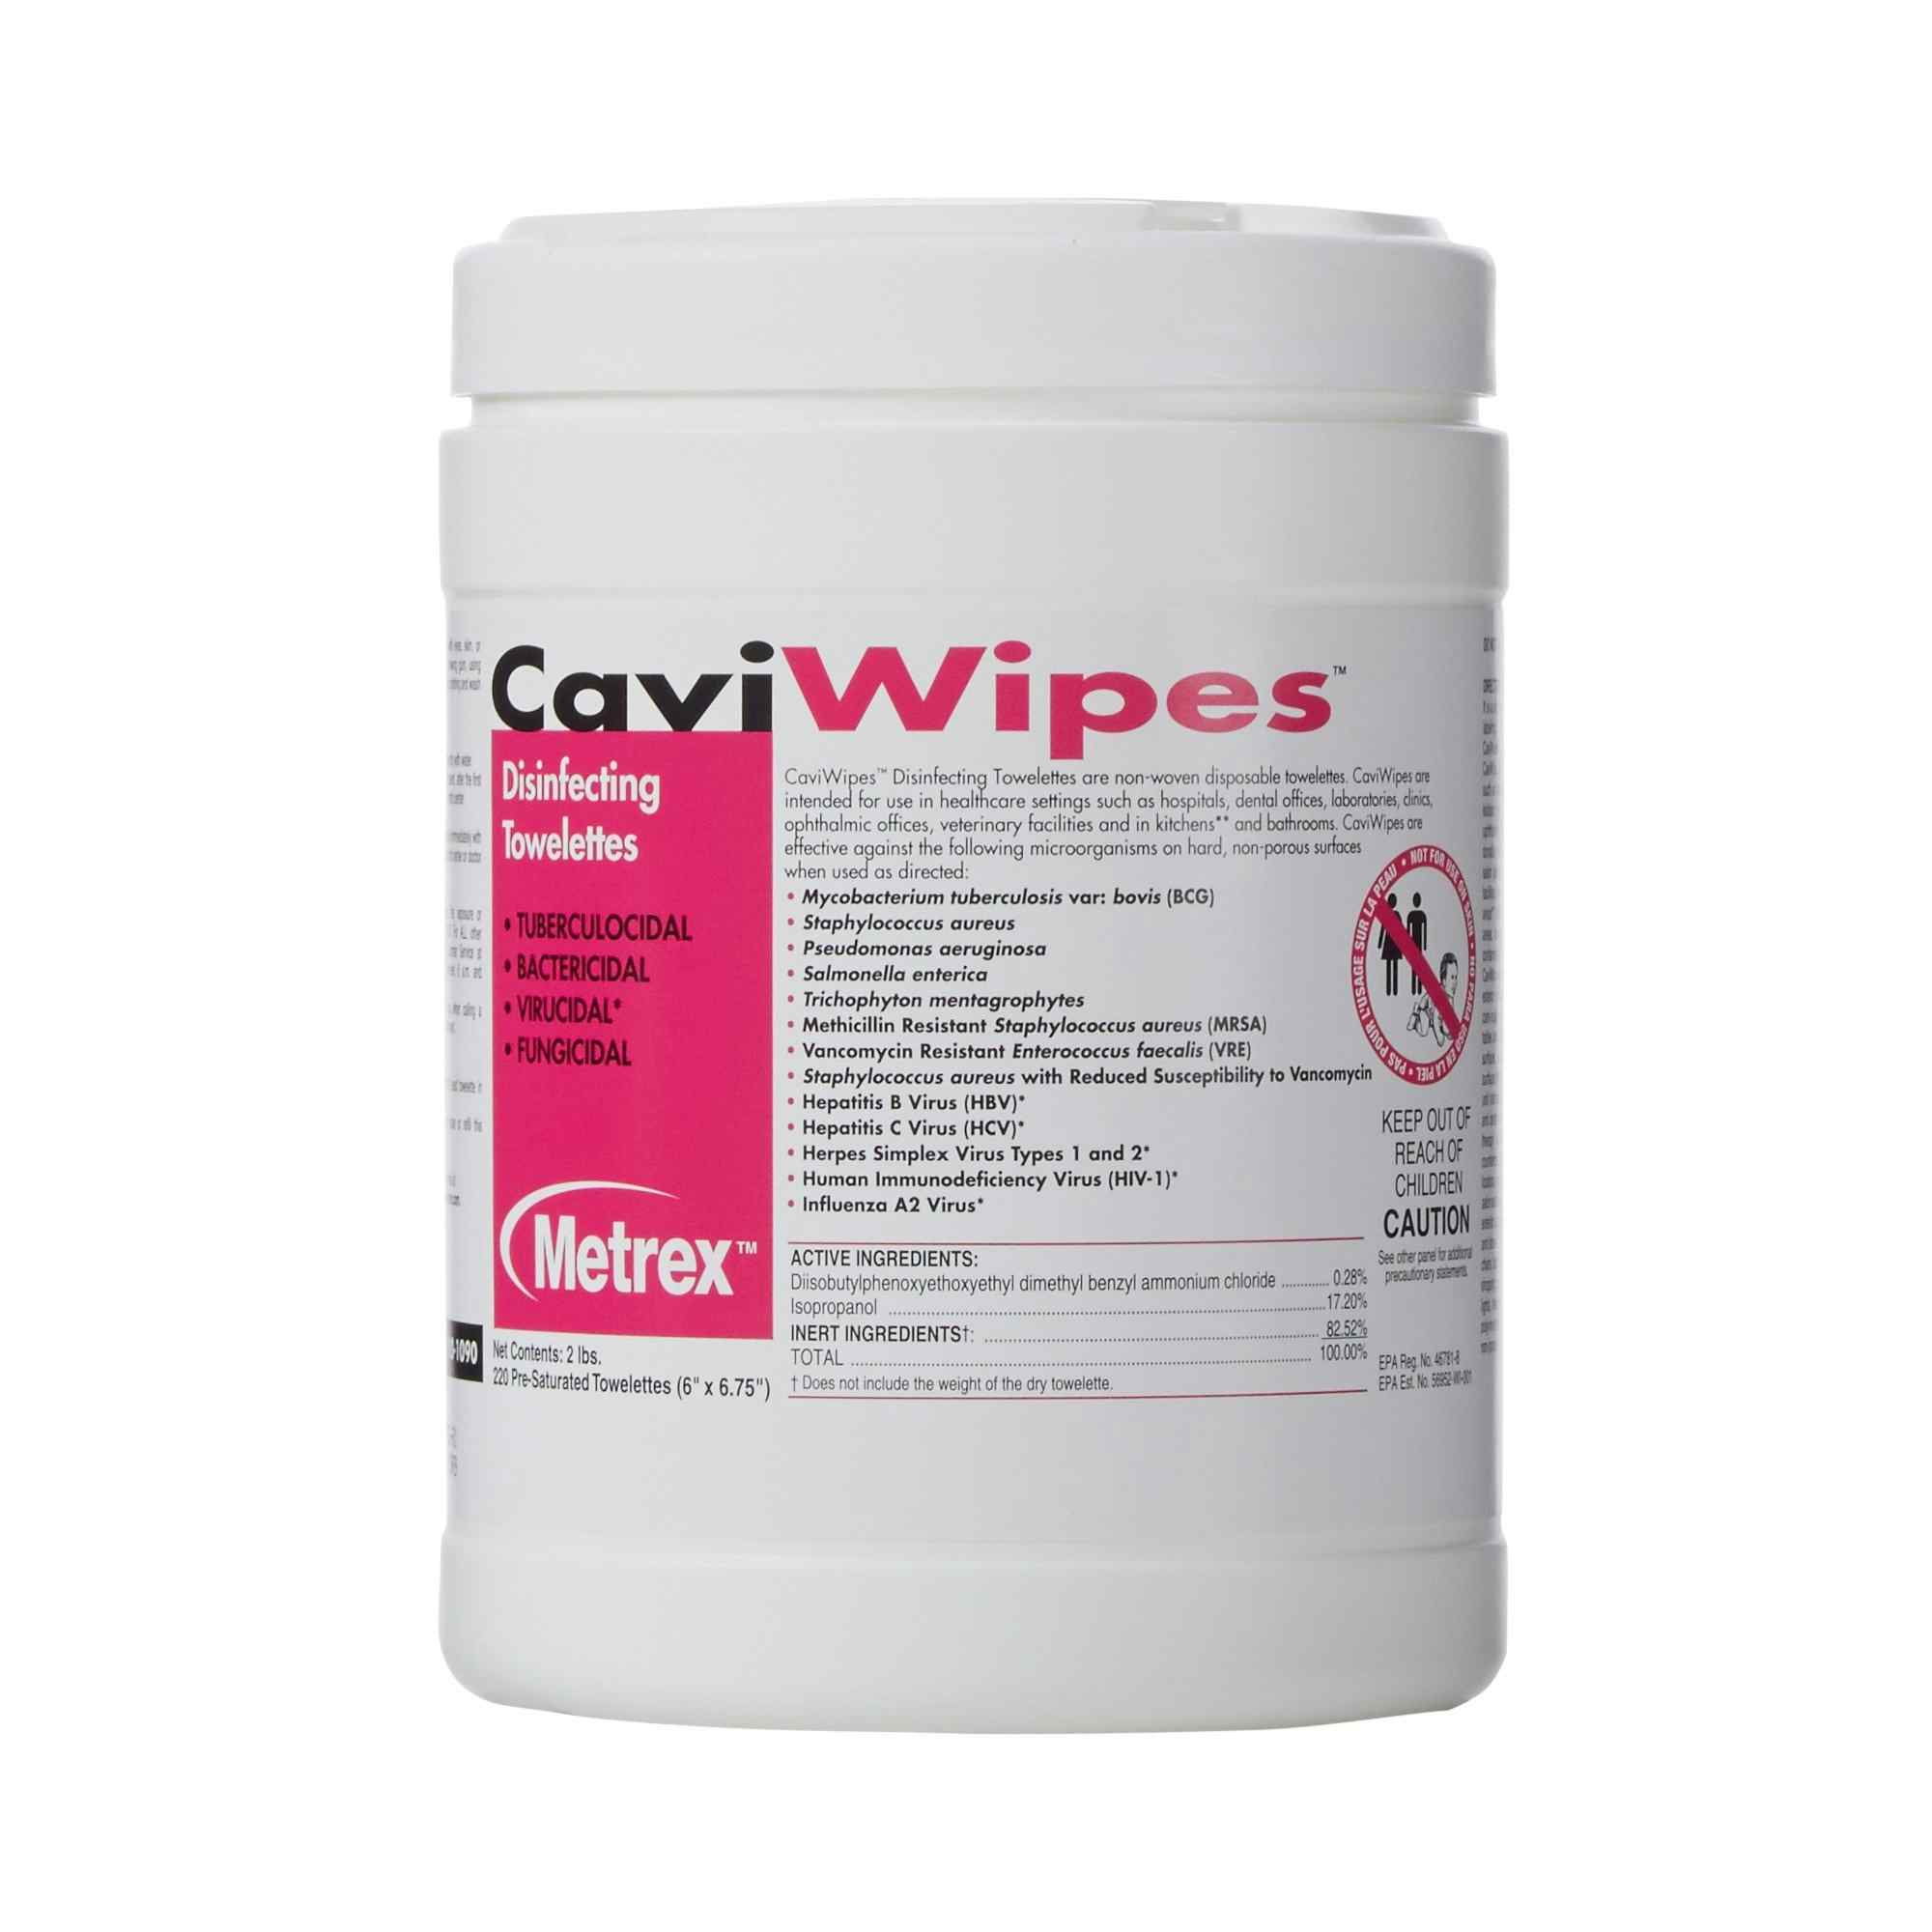 CaviWipes Disinfecting Towelettes, 6 X 6.75"